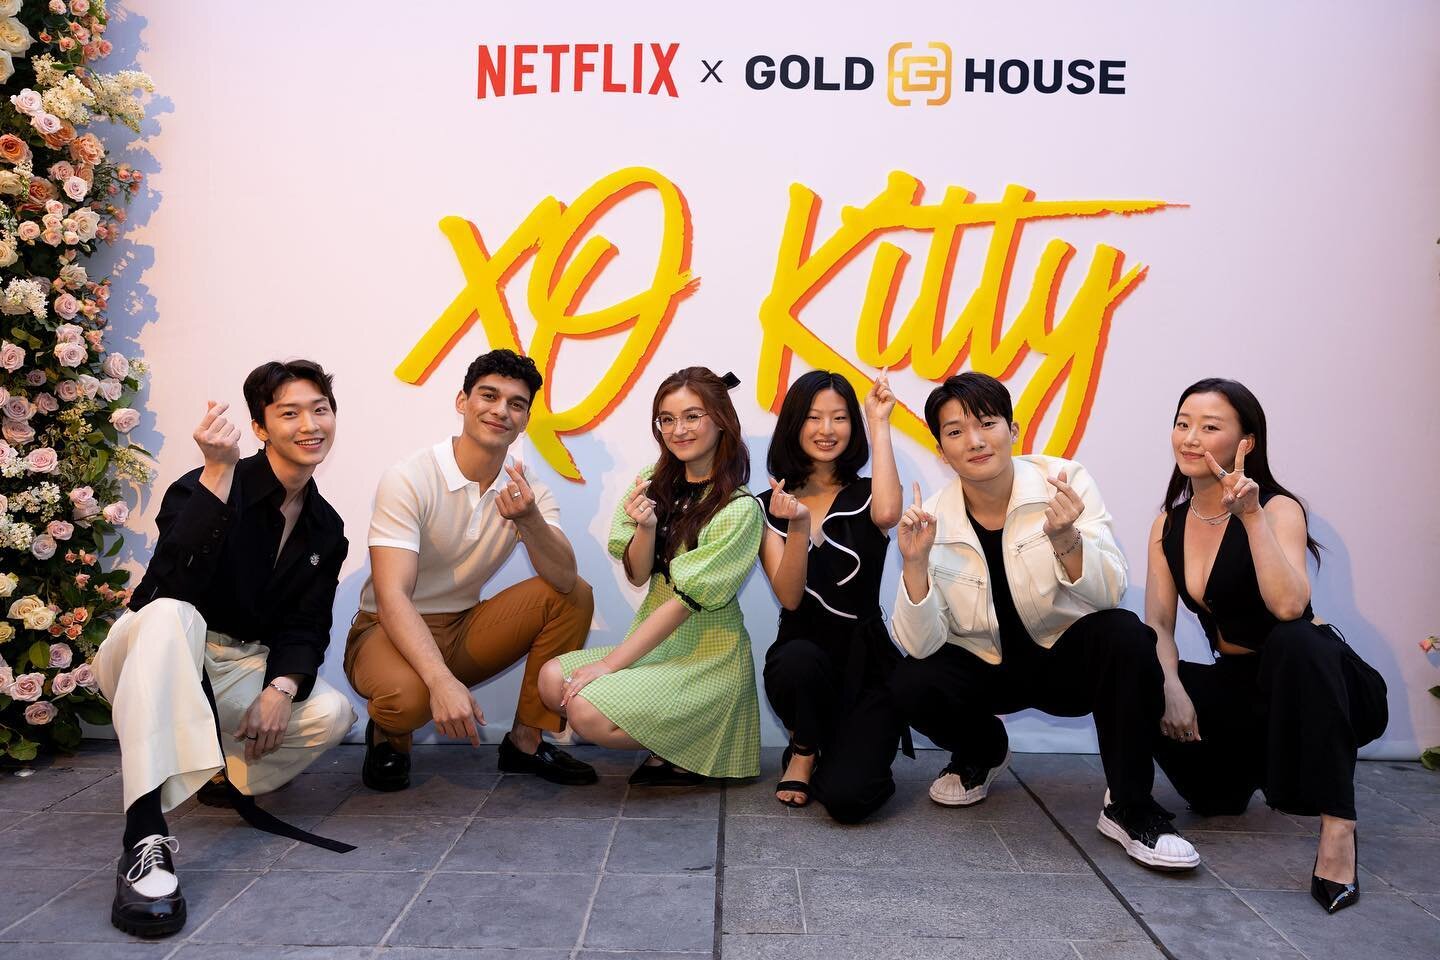 Had a lot of fun setting up Netflix&rsquo;s first episode premiere and Q &amp; A for their new show XO Kitty! 🎥 

@detailsjeannie 
📸: @janawilliamsphotos_ 

#thenamelessproductions #netflix #eventproduction #losangeles #xokitty #eventplanning #prem